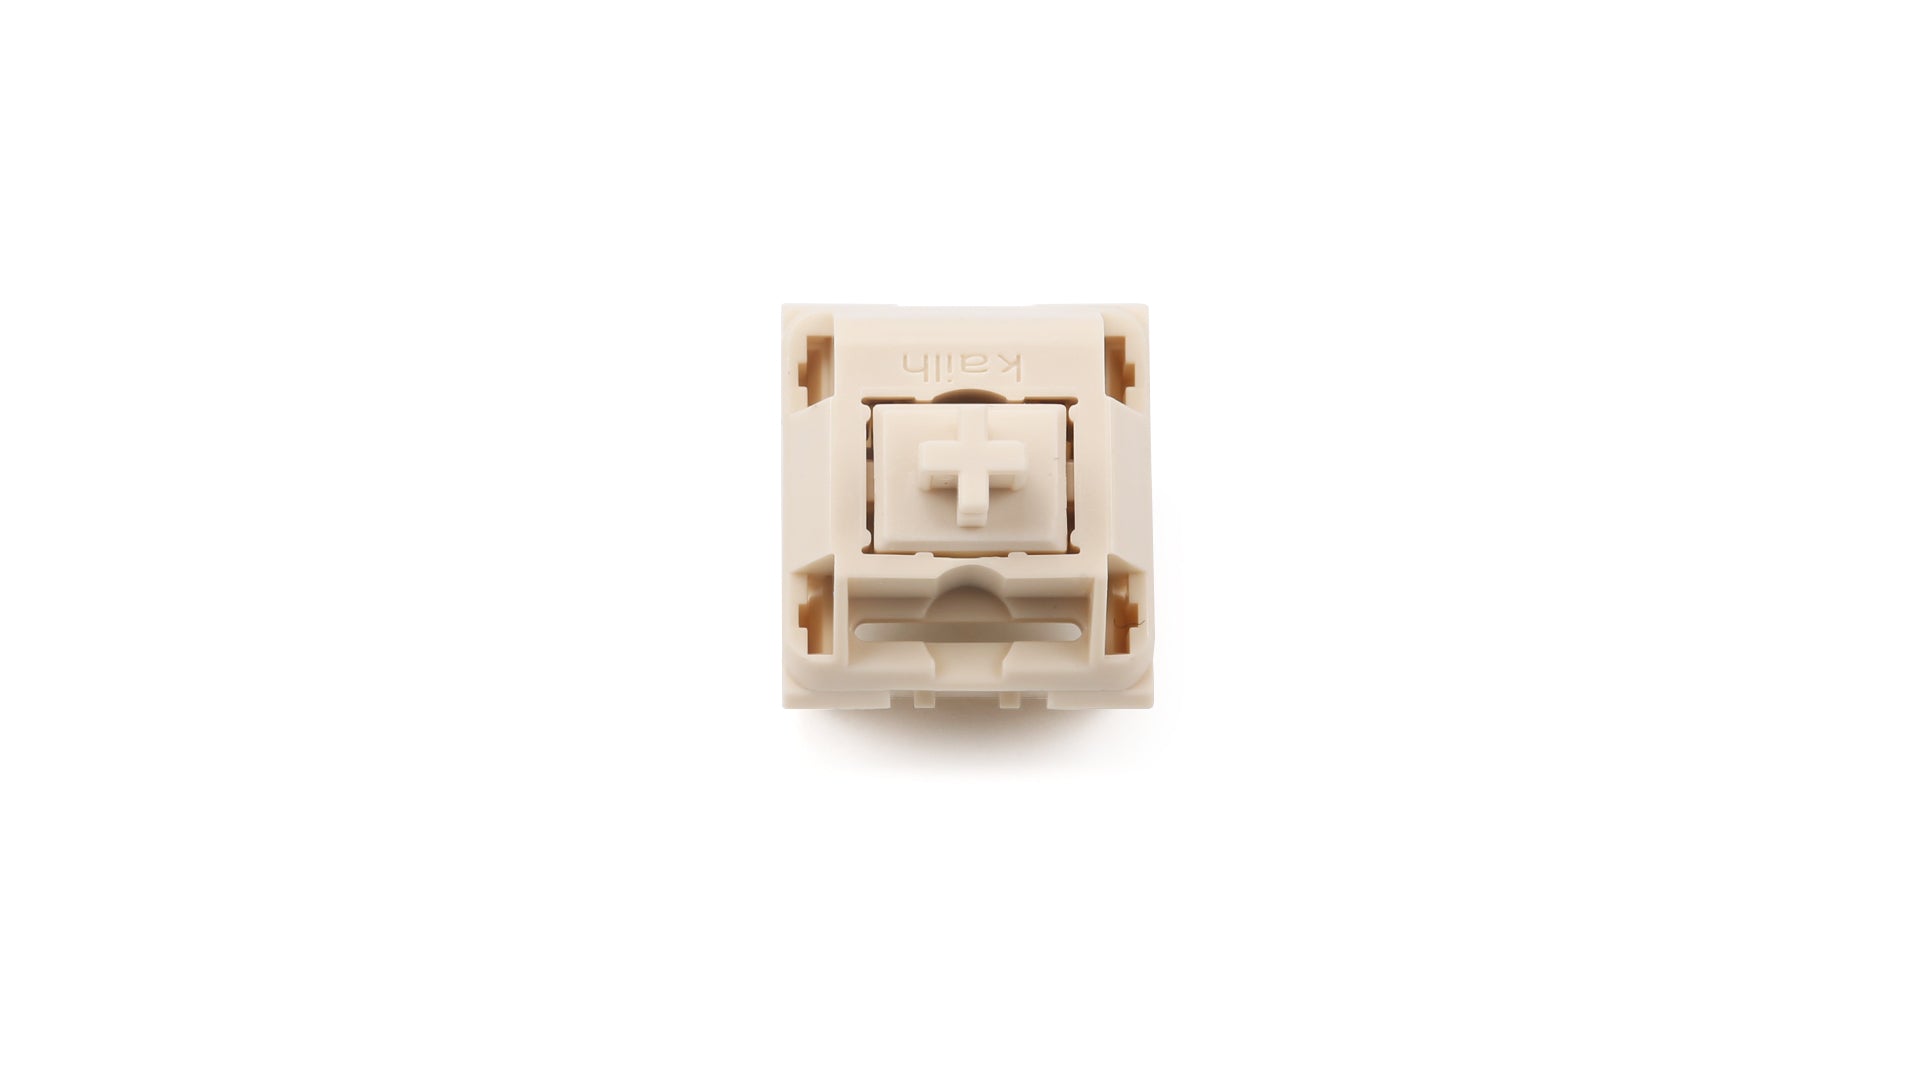 NovelKeys x Kailh Cream Switches For MX Mechanical Keyboard Linear Switch 5pins Novelkeys Cream Switches